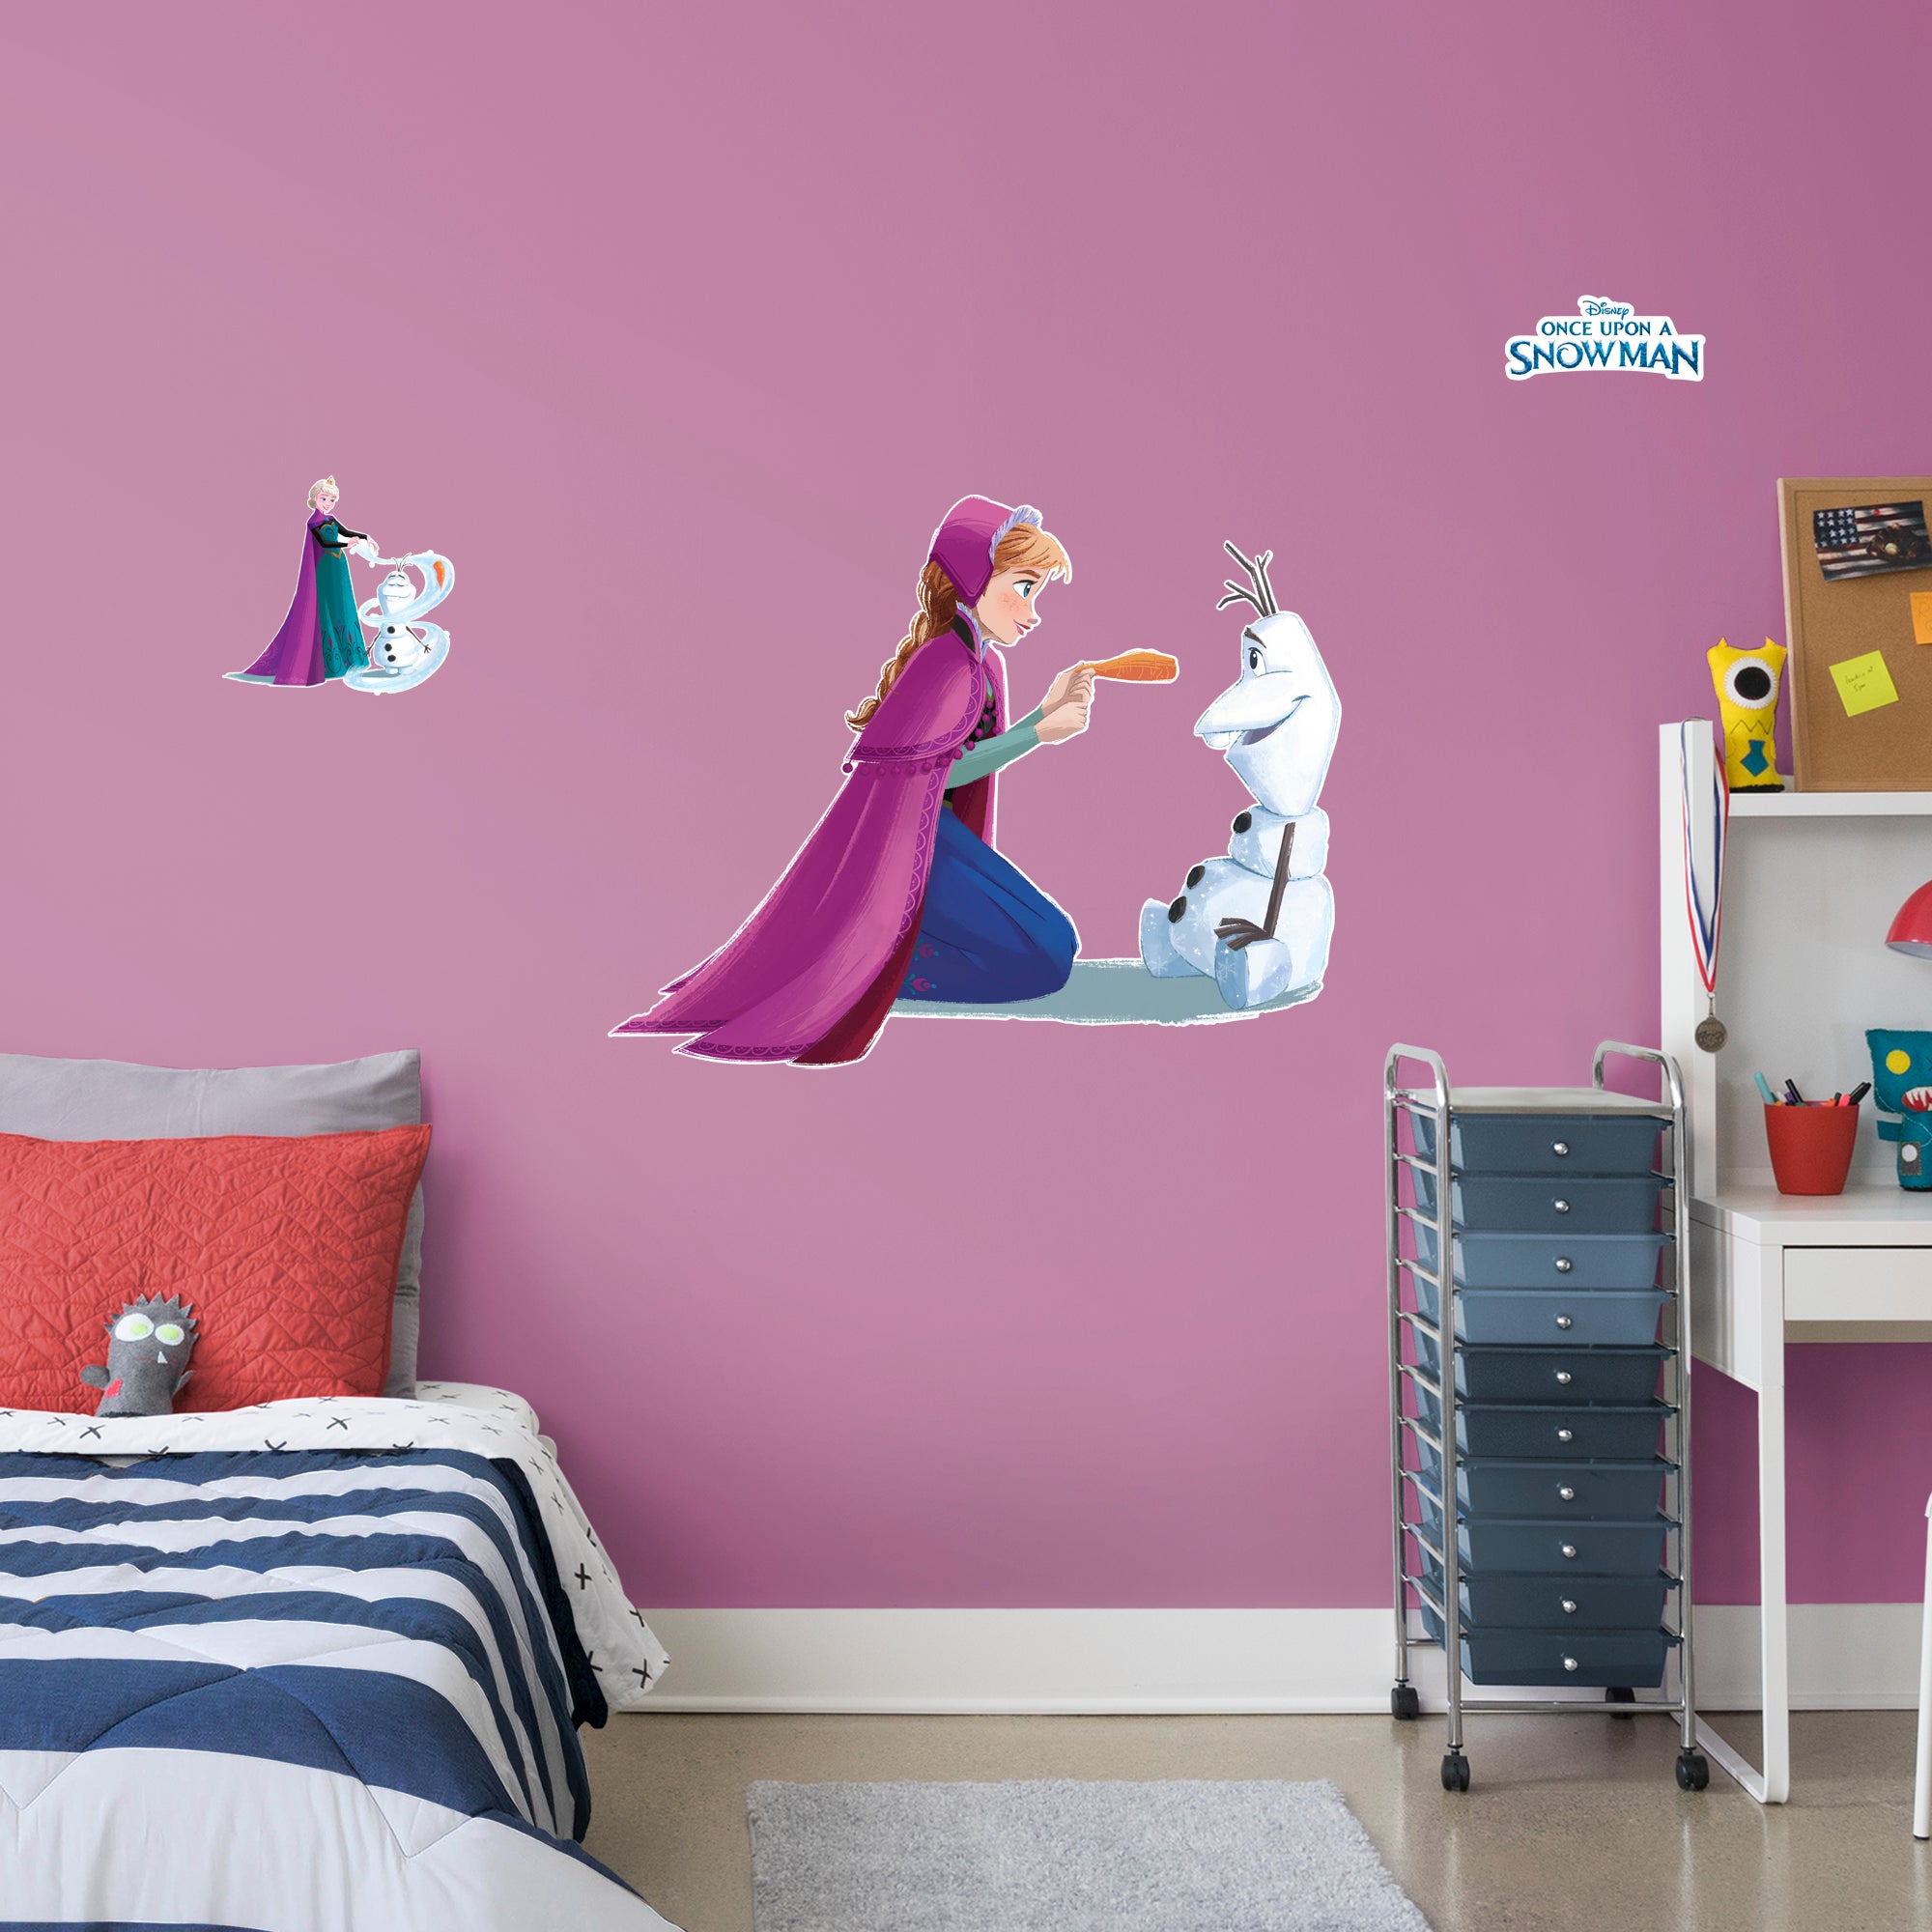 Olaf & Anna: Nose - Frozen - Once Upon A Snowman - Officially Licensed Disney Removable Wall Decal Giant Character + 2 Decals by